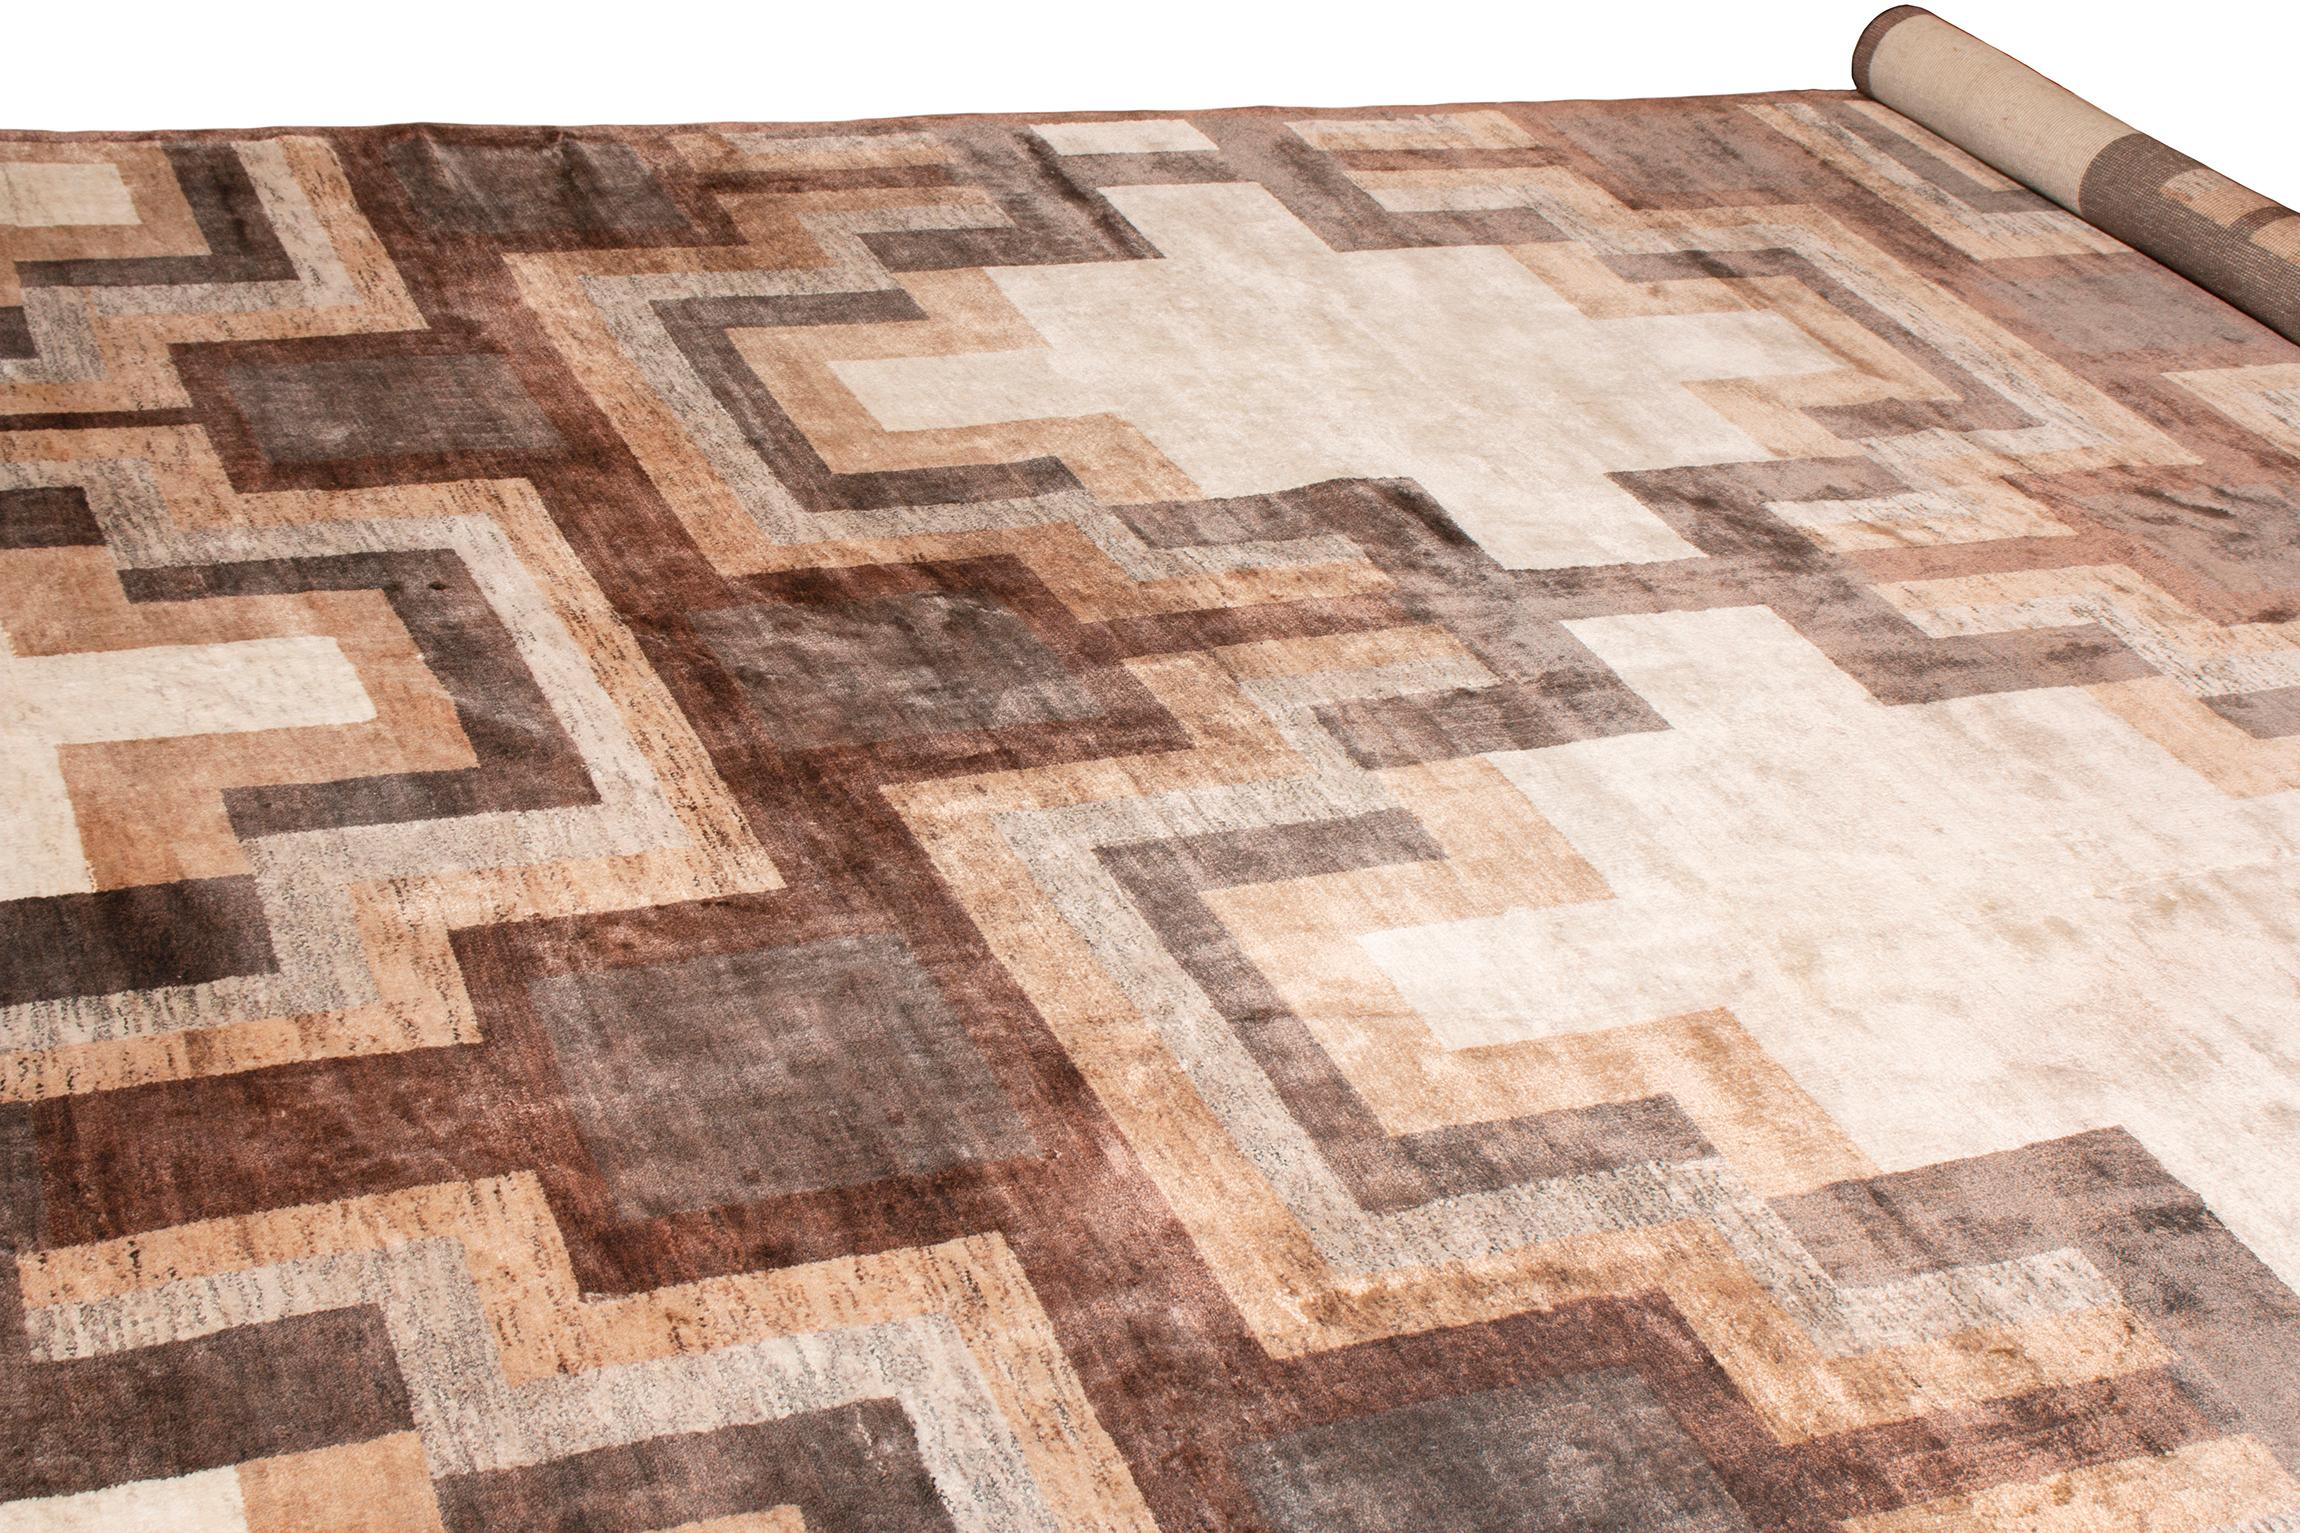 A 12 x 18 rug from the Mid-Century Modern rug collection by Rug & Kilim, hand knotted in a blend of wool and natural silk marrying a modern approach to Art Deco rug styles with a comfortable, rich colorway and chic sense of movement. 

On the